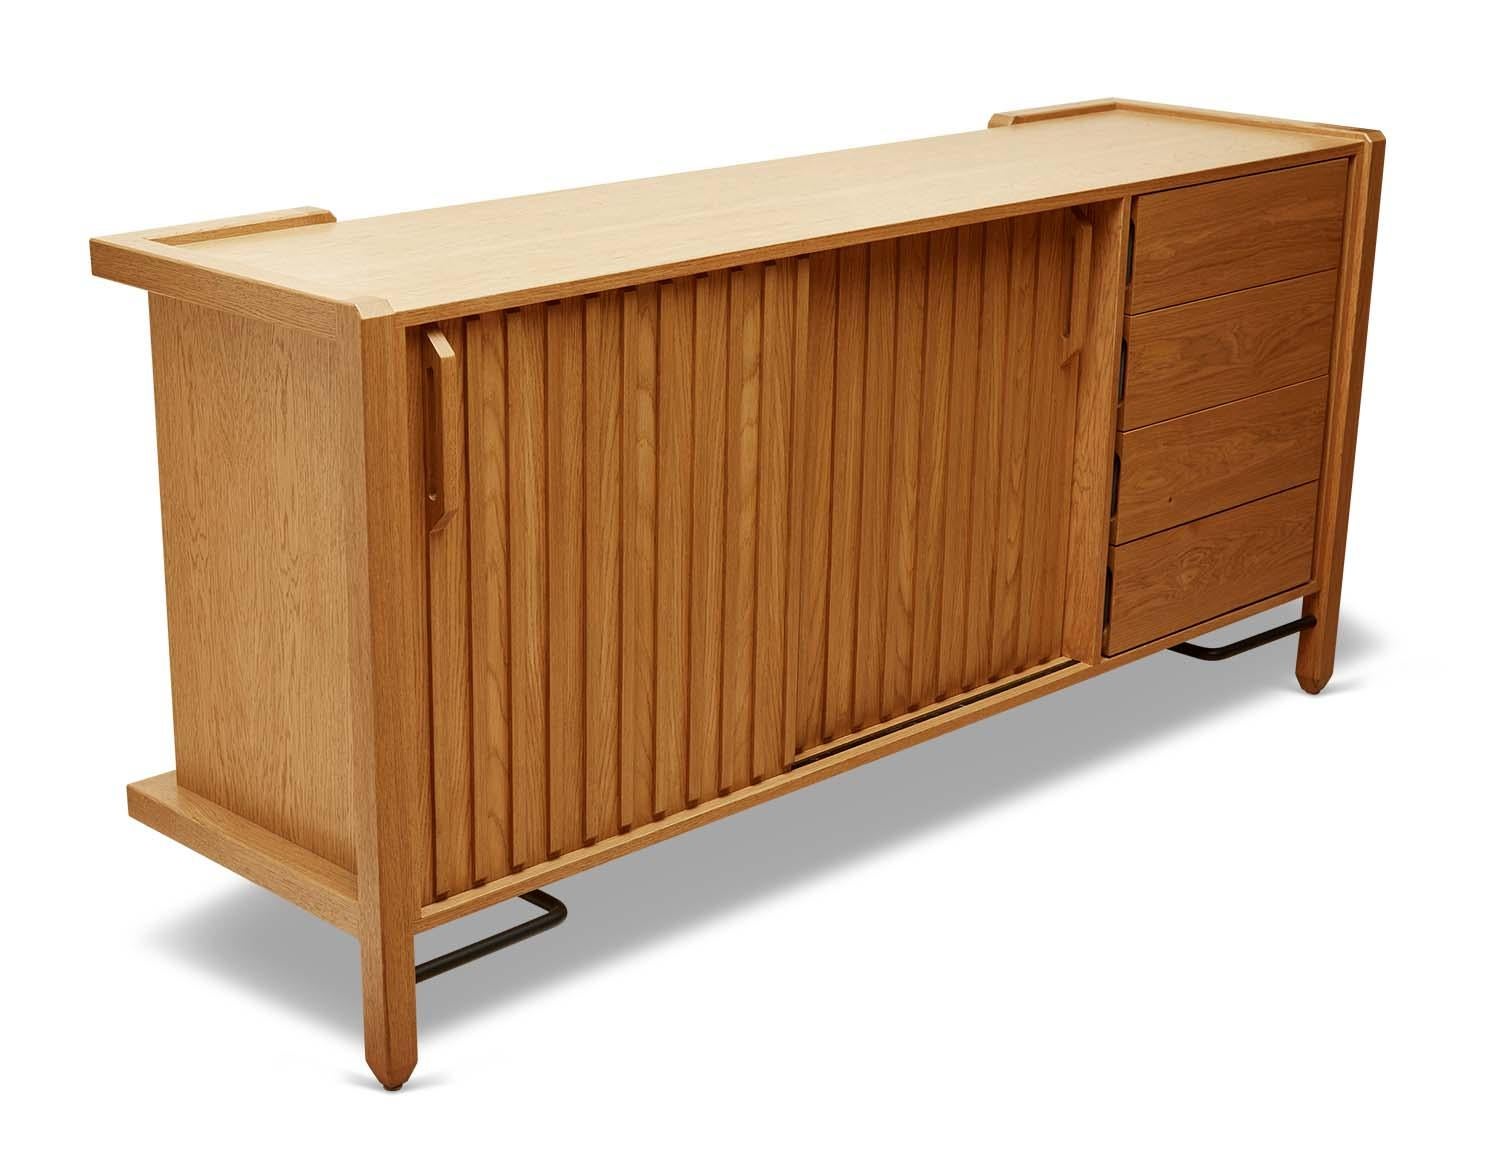 The Ojai credenza has four drawers and two bypass doors with open storage behind it. It has solid white oak or American walnut legs and case, and features a metal stretcher on the base.

The Lawson-Fenning Collection is designed and handmade in Los